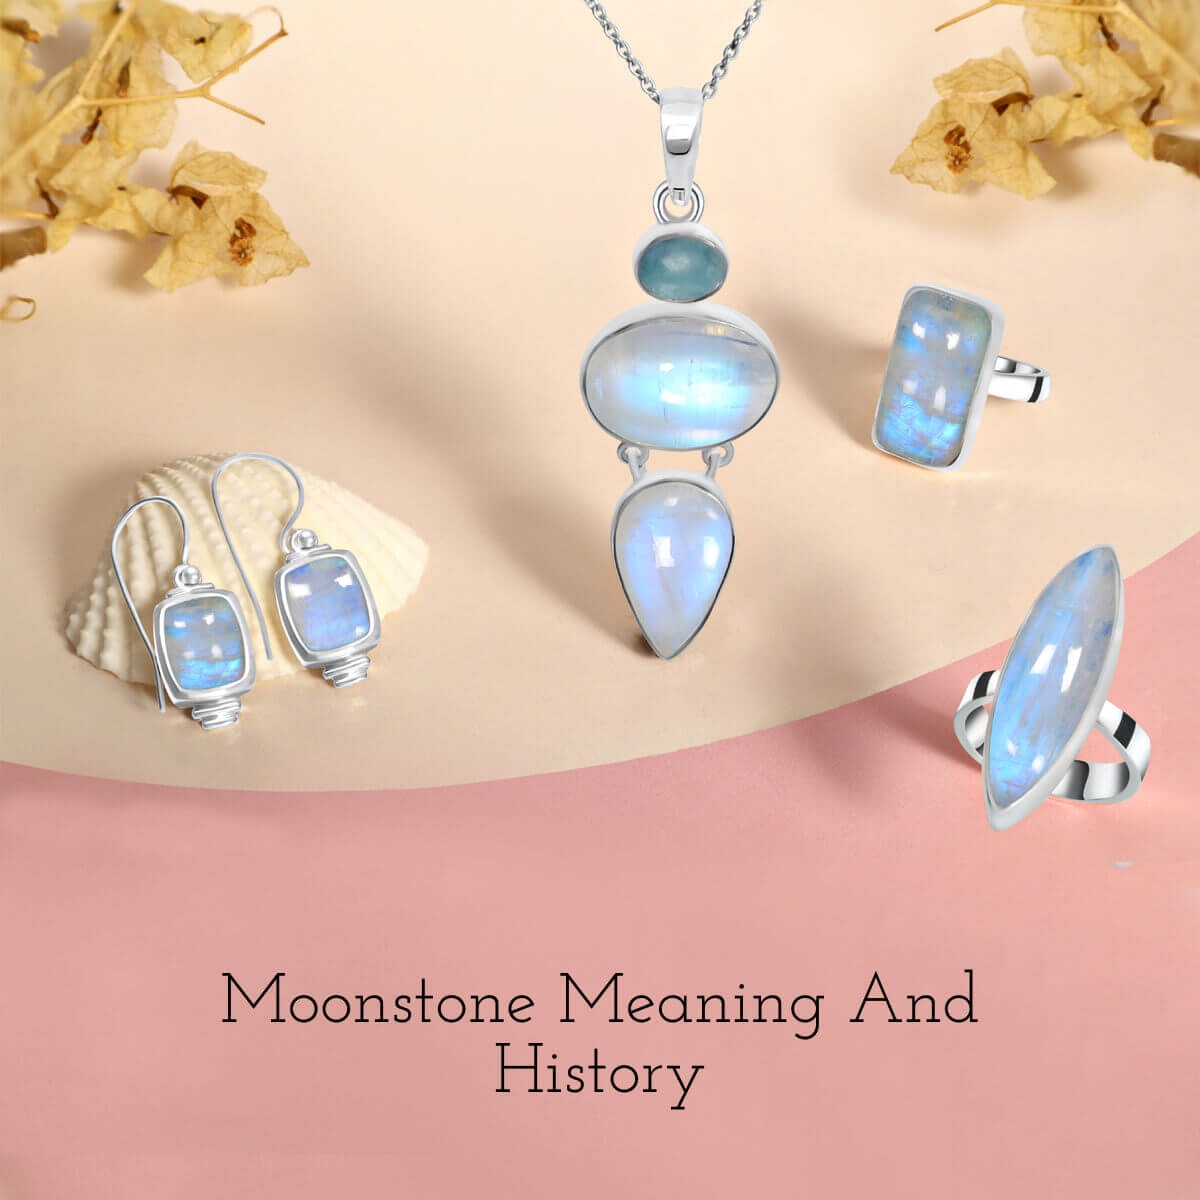 Meaning And History Of Moonstone